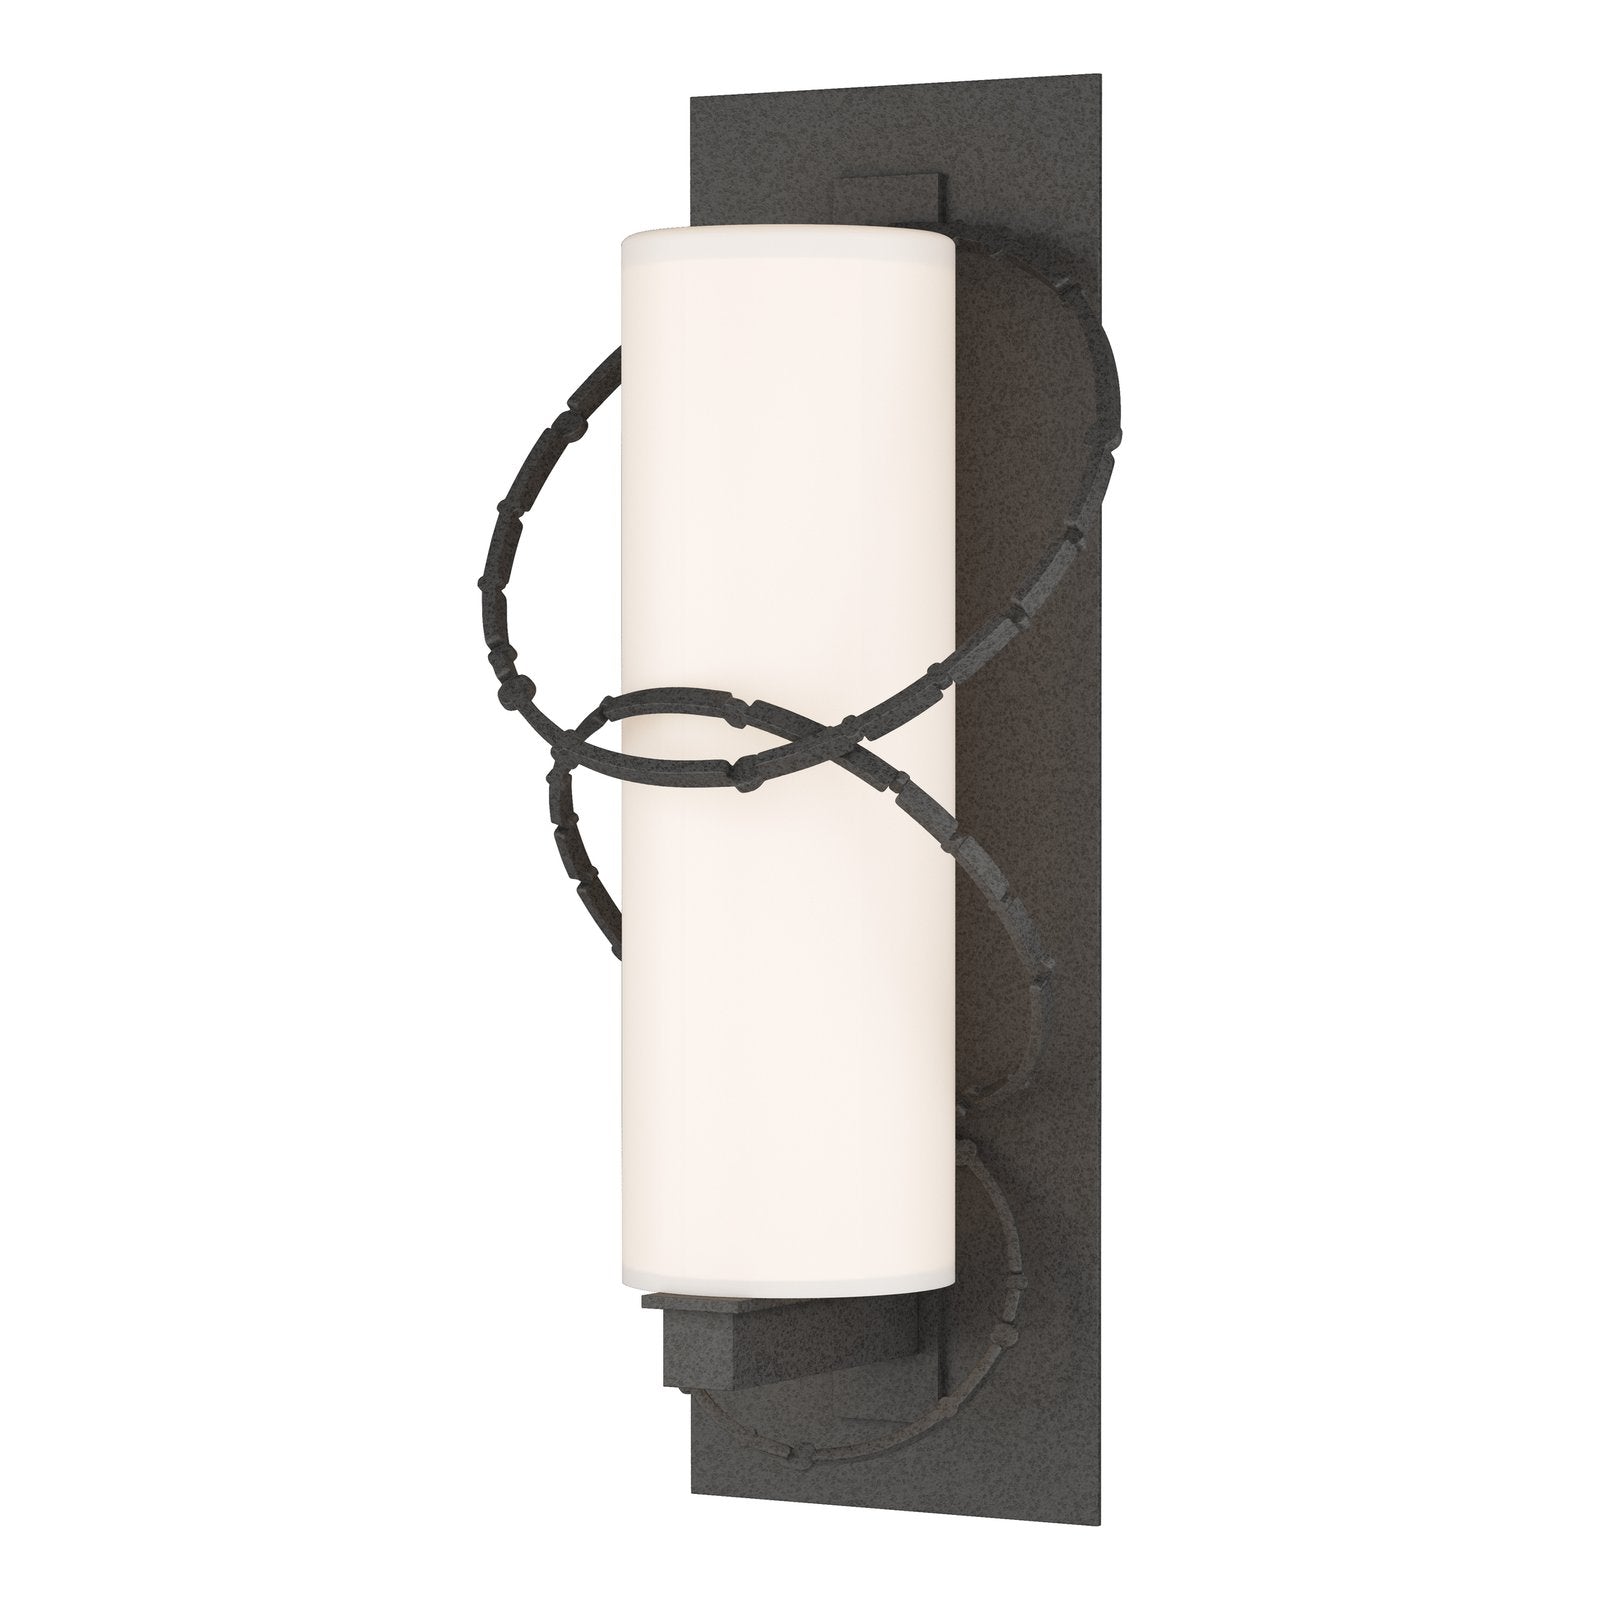 Hubbardton Forge Olympus Large Outdoor Sconce Outdoor l Wall Hubbardton Forge Coastal Natural Iron  